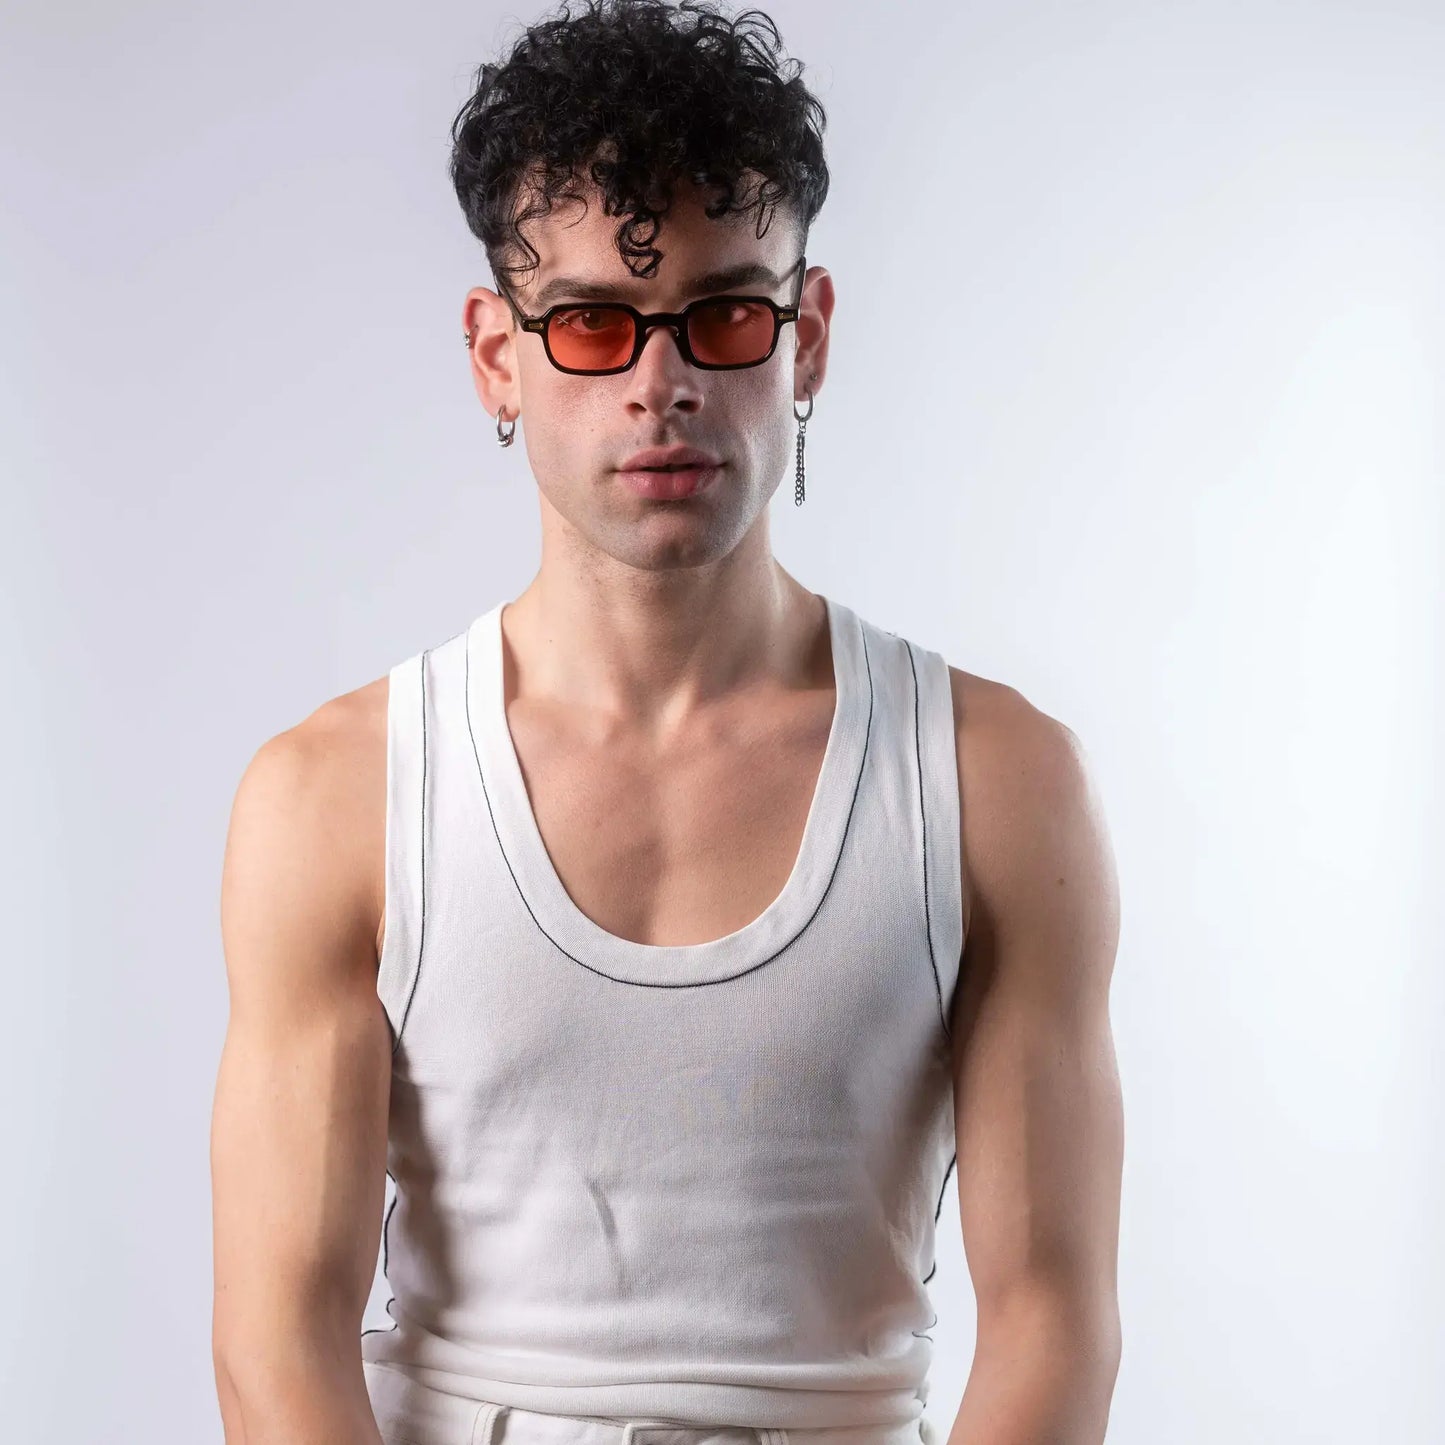 A male model wearing Exposure Sunglasses polarized sunglasses with black frames and red lenses, posing against a white background.